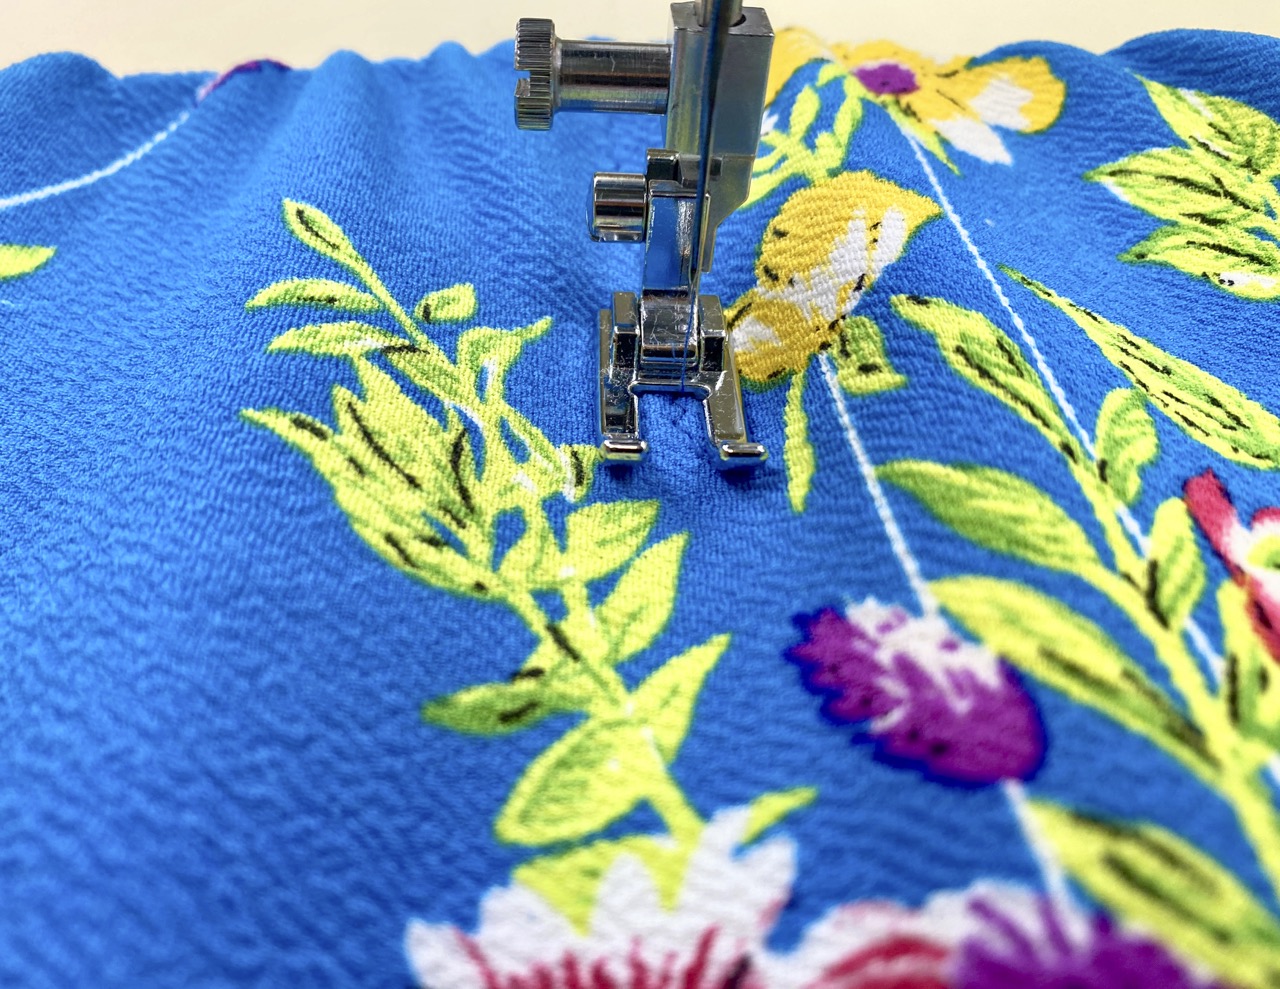 Learn how to sew a simple One-Seam Skirt by The NZP Team at the Nancy Zieman Productions Blog.